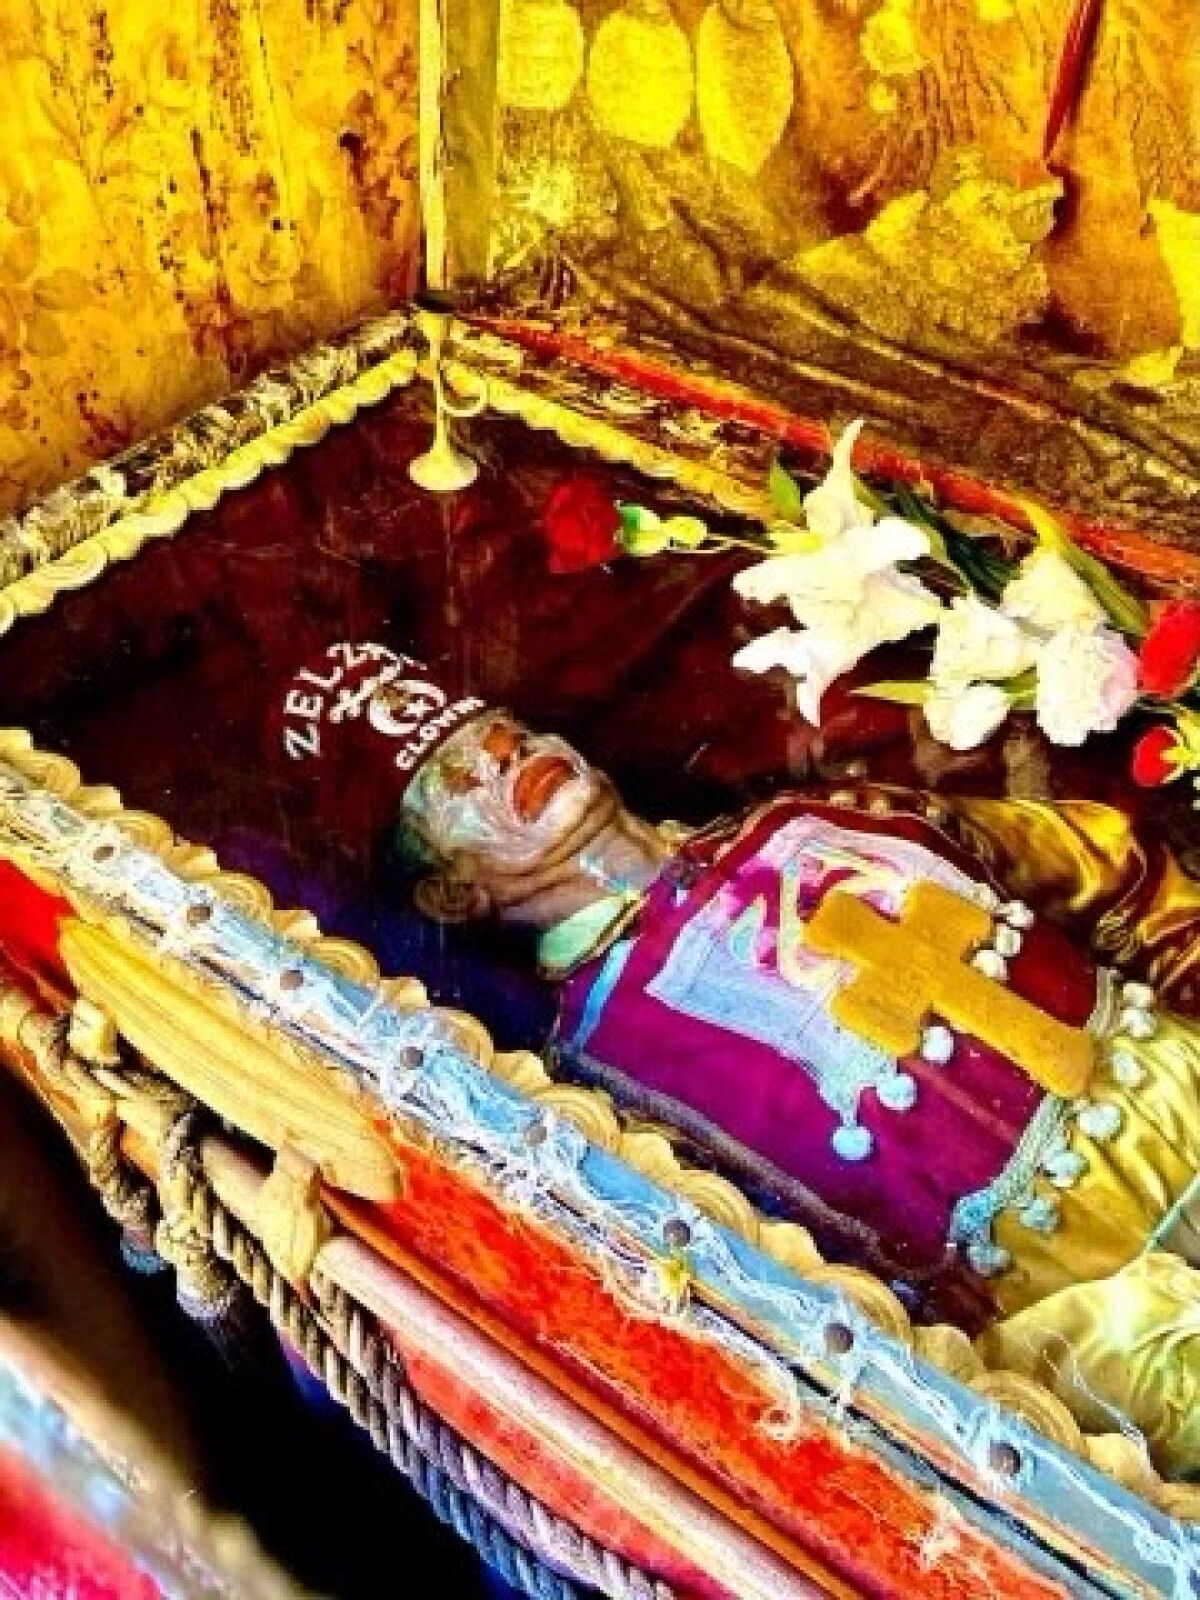 The body of a clown rests under glass in a brightly colored casket.